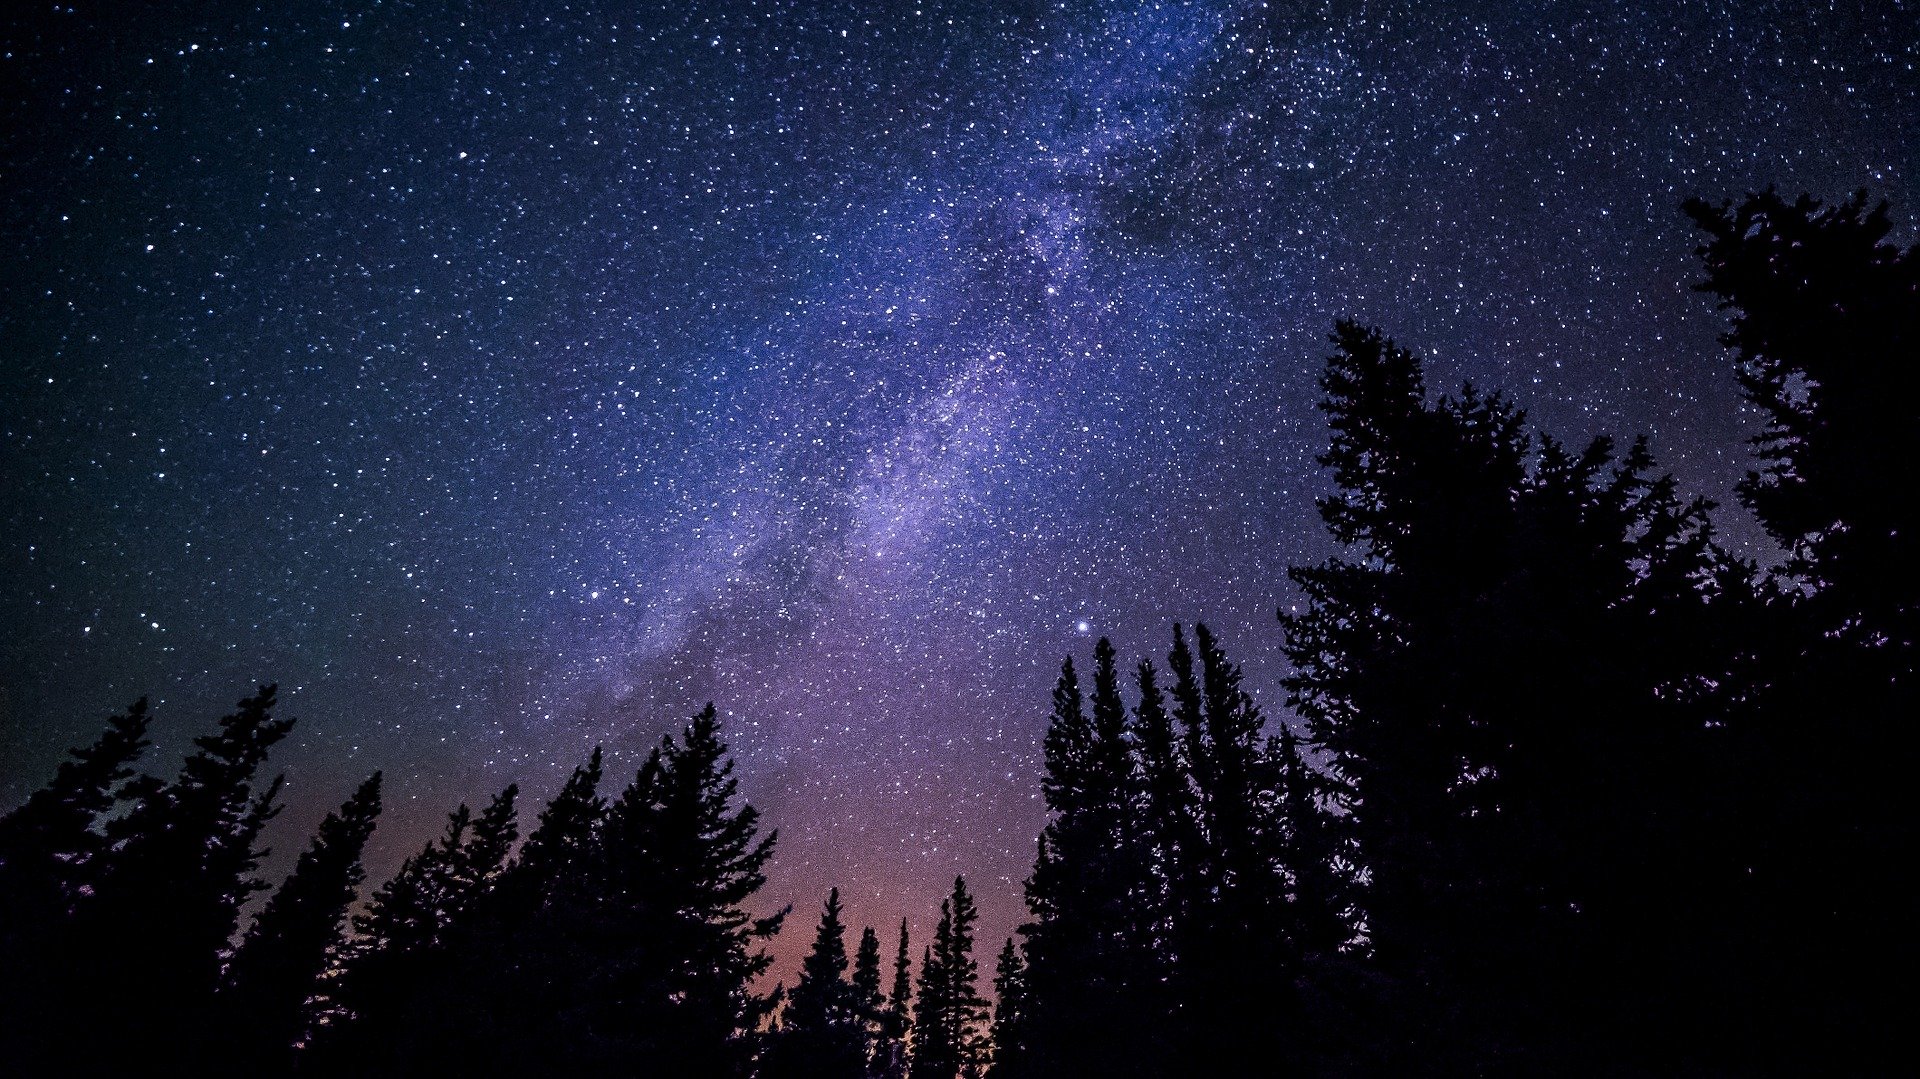 The Milky Way framed by evergreen trees.